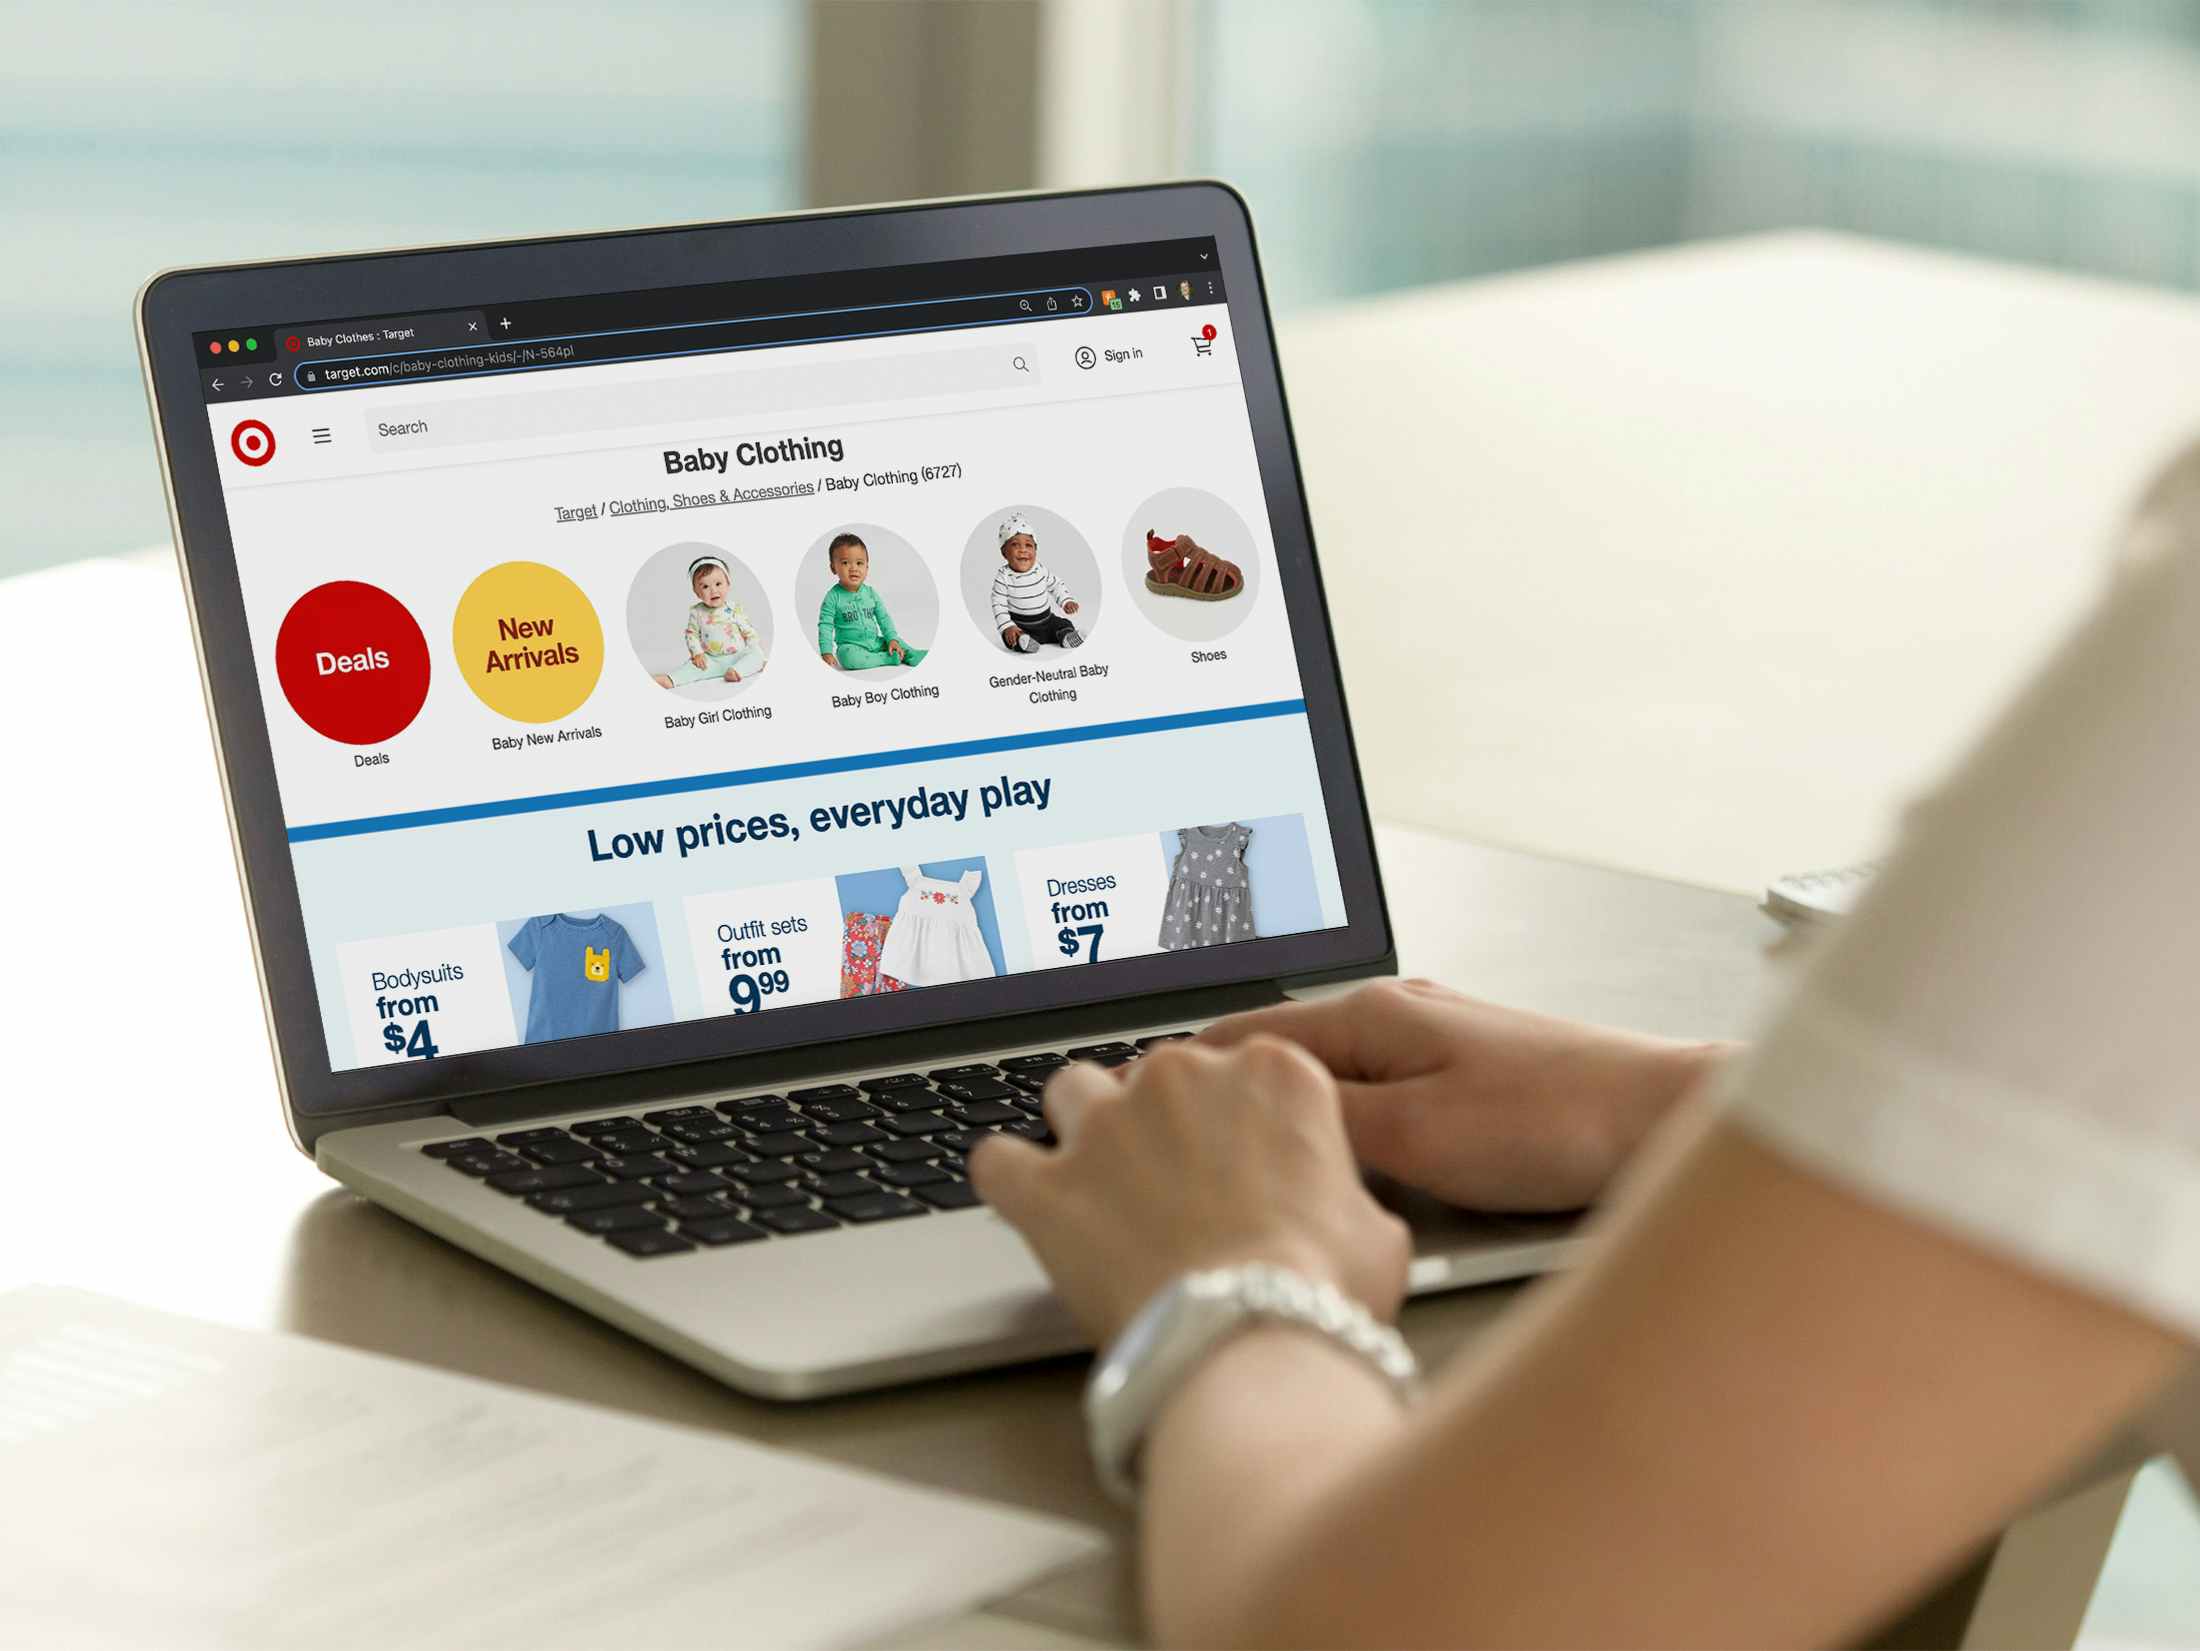 A person using a laptop, looking at the Baby Clothing section on Target's website.